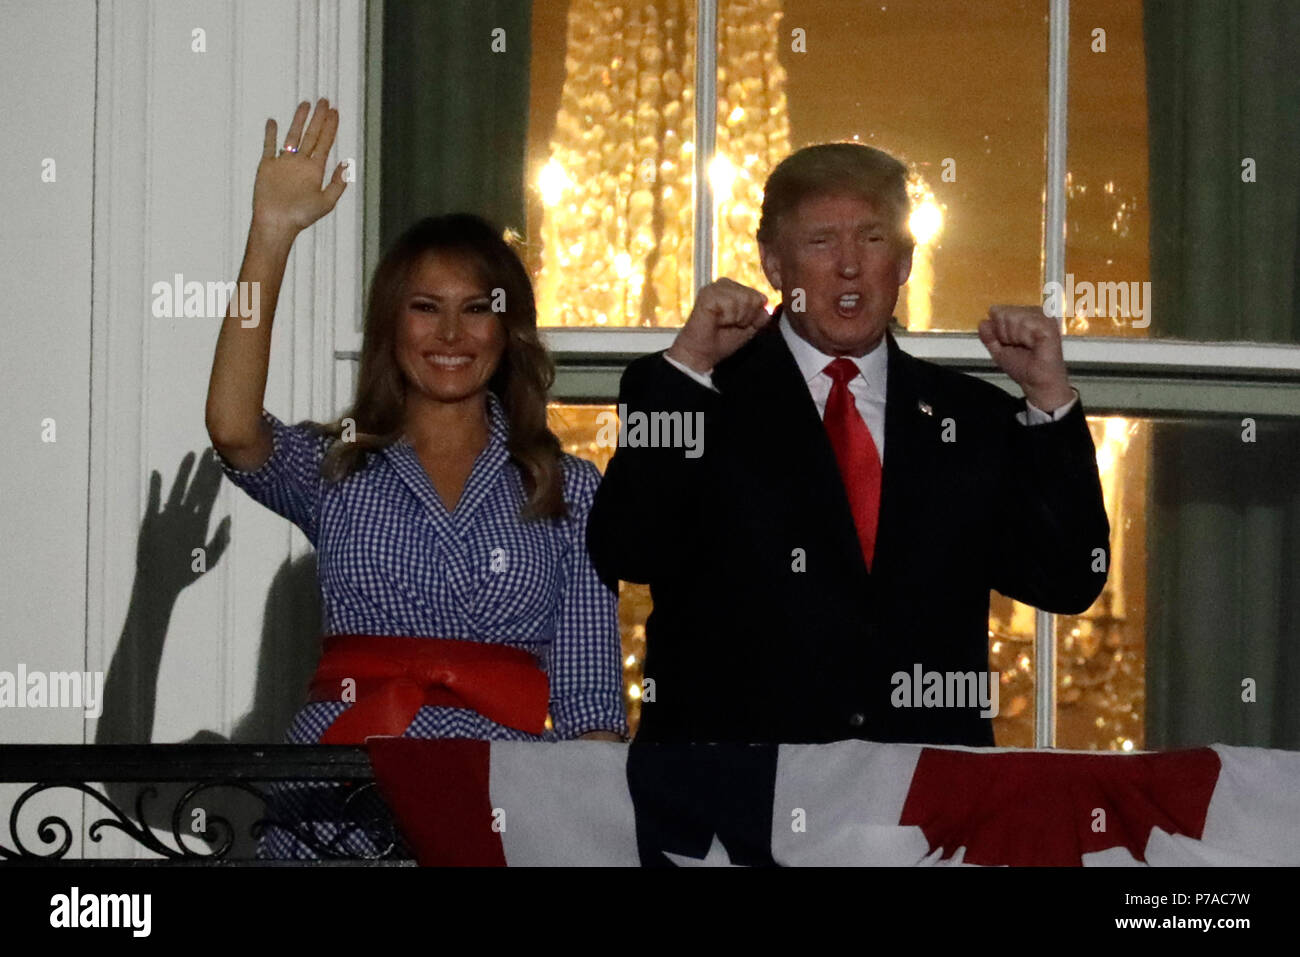 Washington, DC, USA. 4th July, 2018. United States President Donald J. Trump  and First Lady Melania Trump react from the Truman Balcony of the White  House during a fireworks display in Washington,